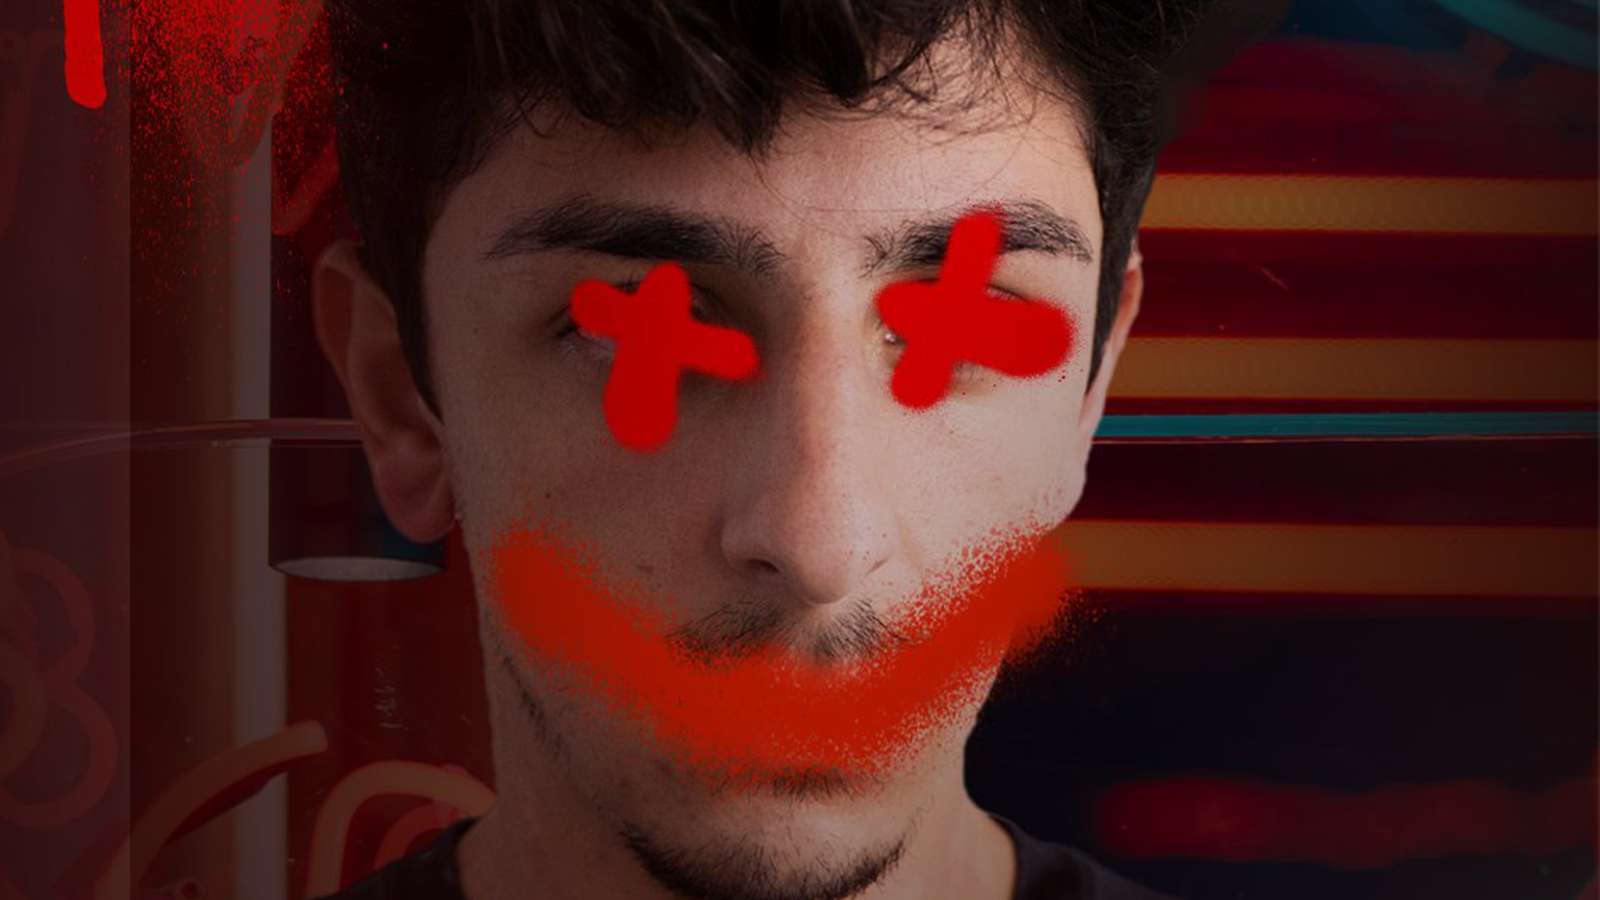 FaZe Rug with his eyes and mouth marked out in red spray paint.